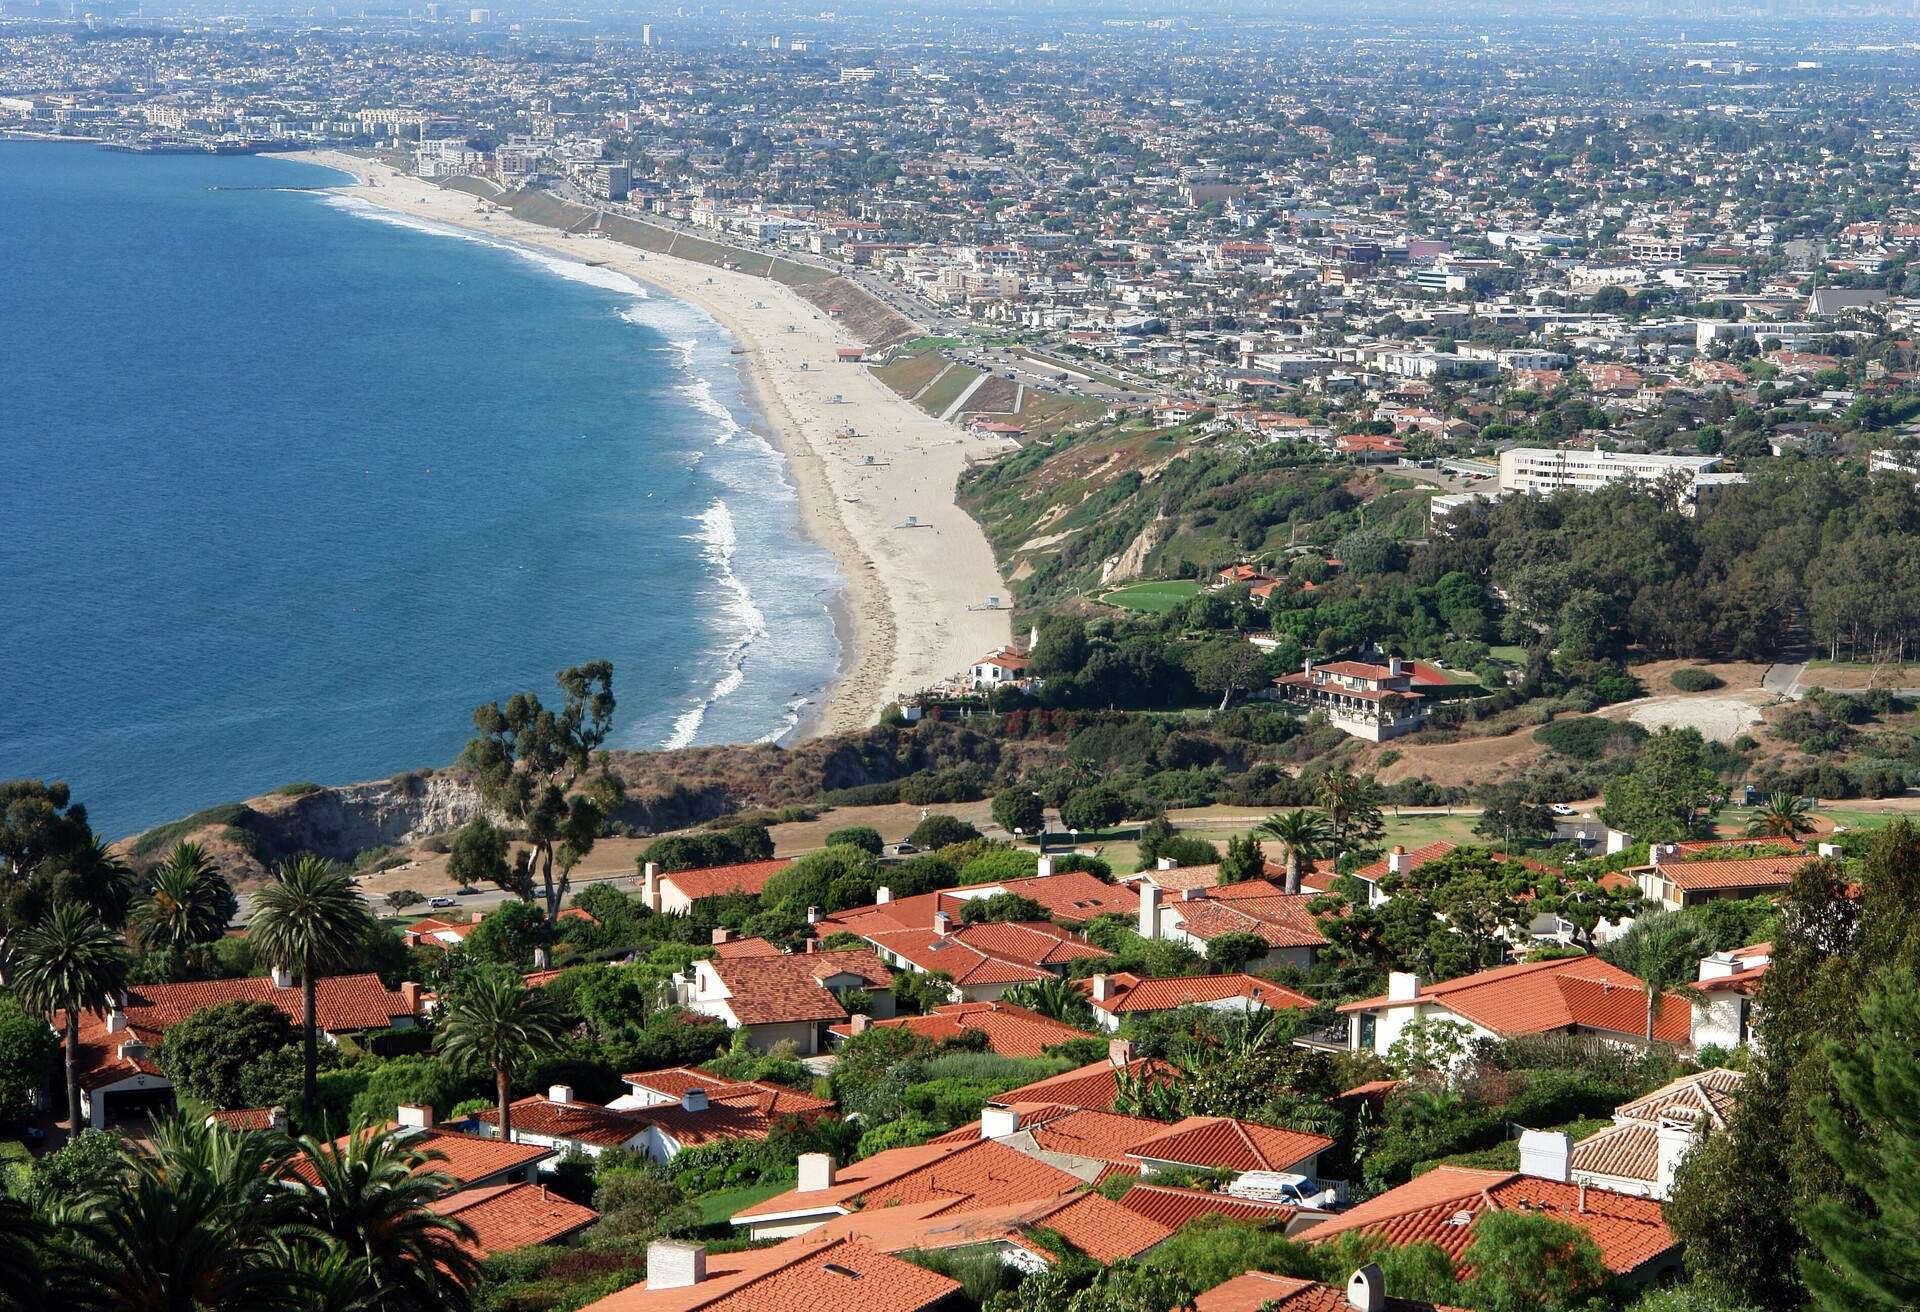 DEST_USA_CALIFORNIA_LOS-ANGELES_SOUTH-BAY_GettyImages-157185546.jpg